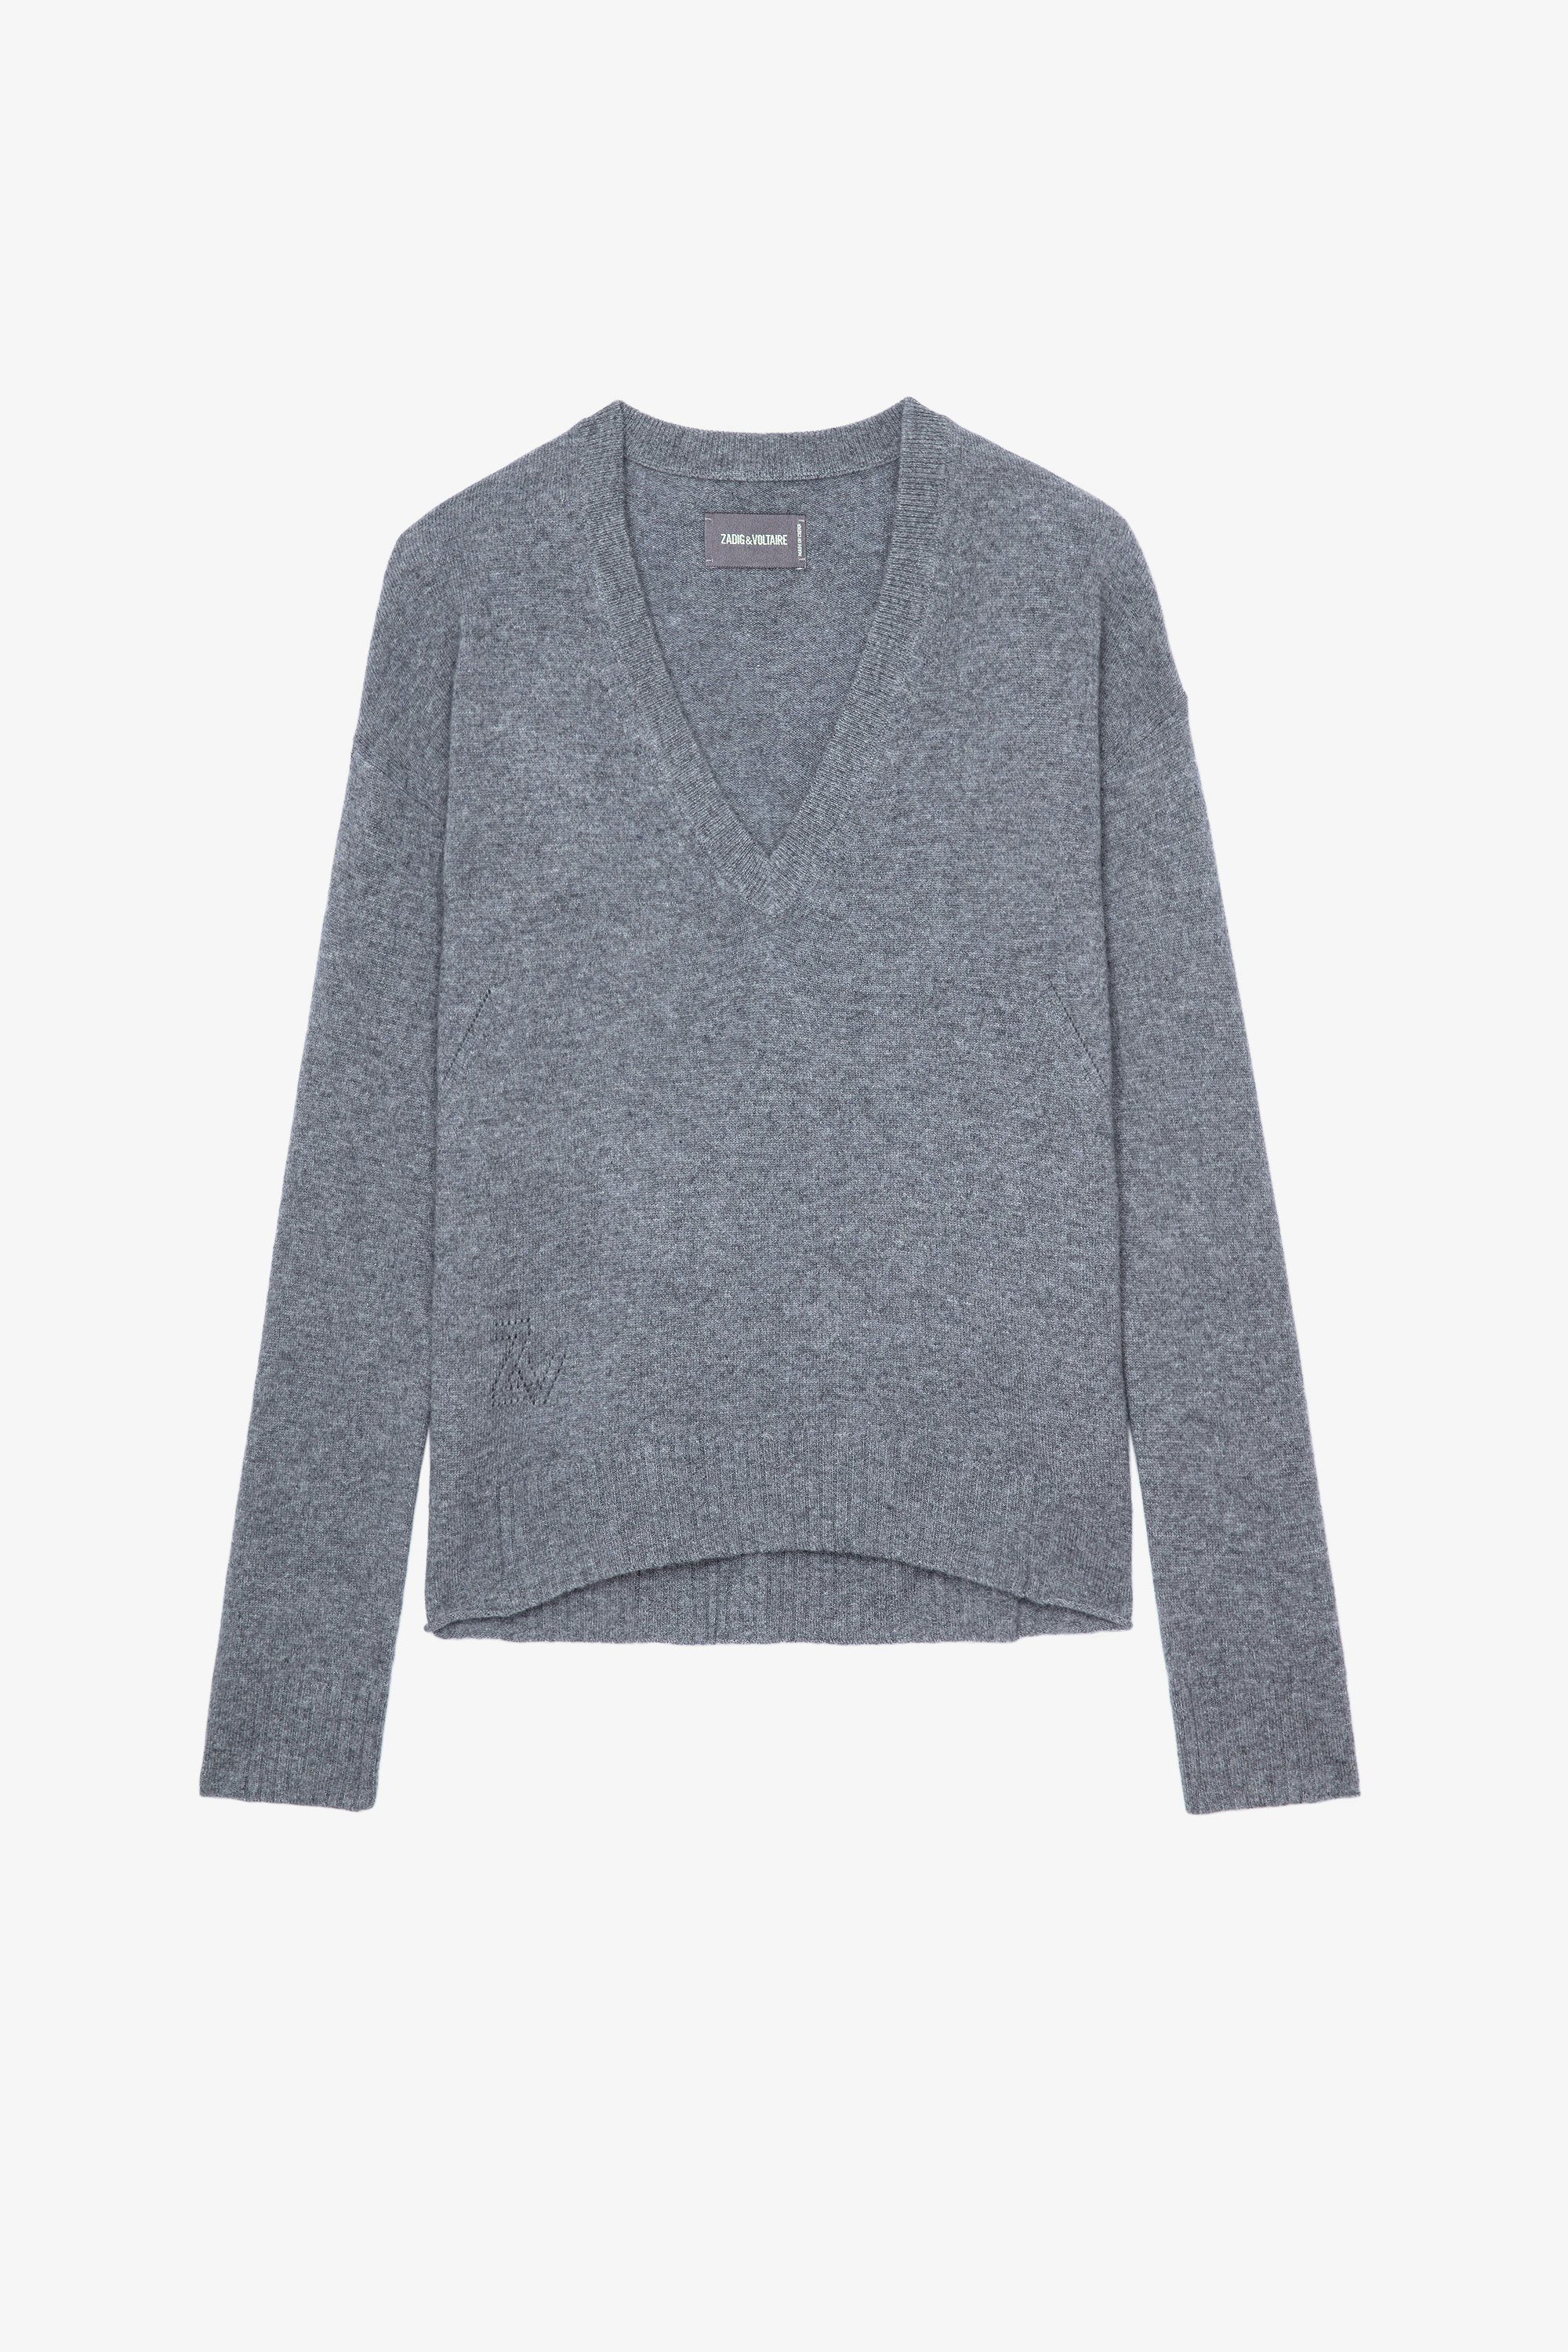 Vivi Patch Cashmere Jumper Grey cashmere jumper with star patches on the elbows